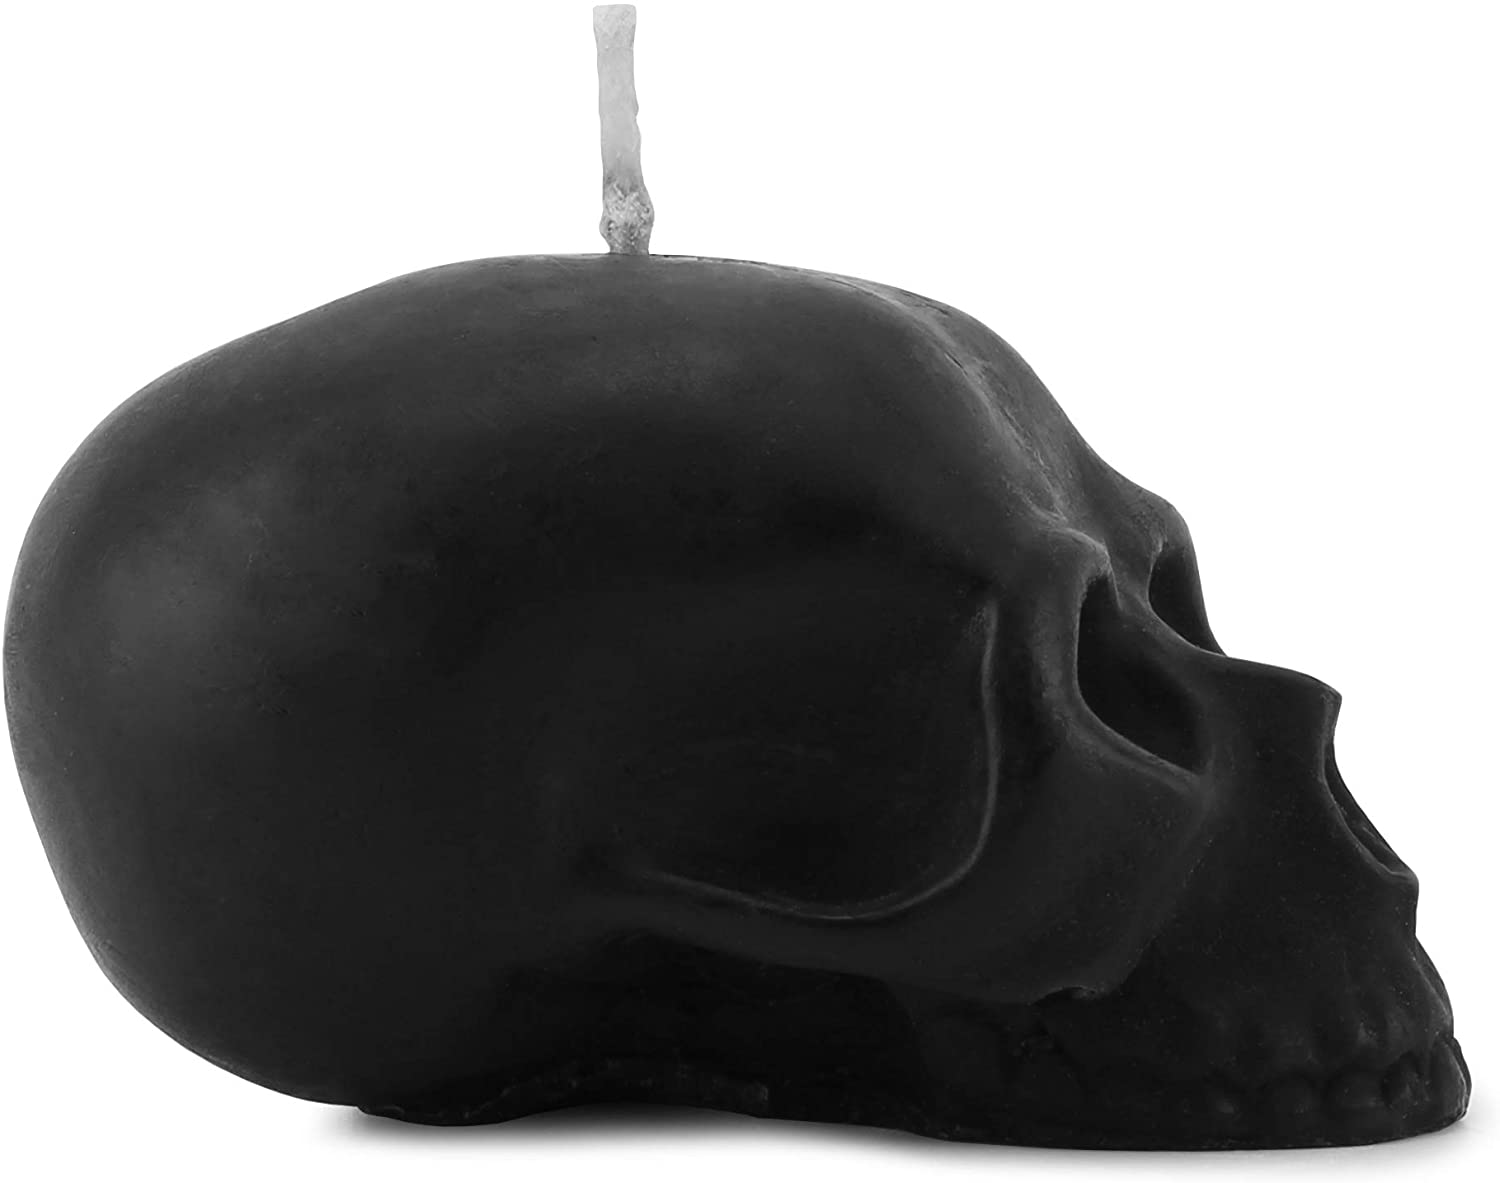 Large Skull Candles (2-Pack, Black); Decorative Themed Candles